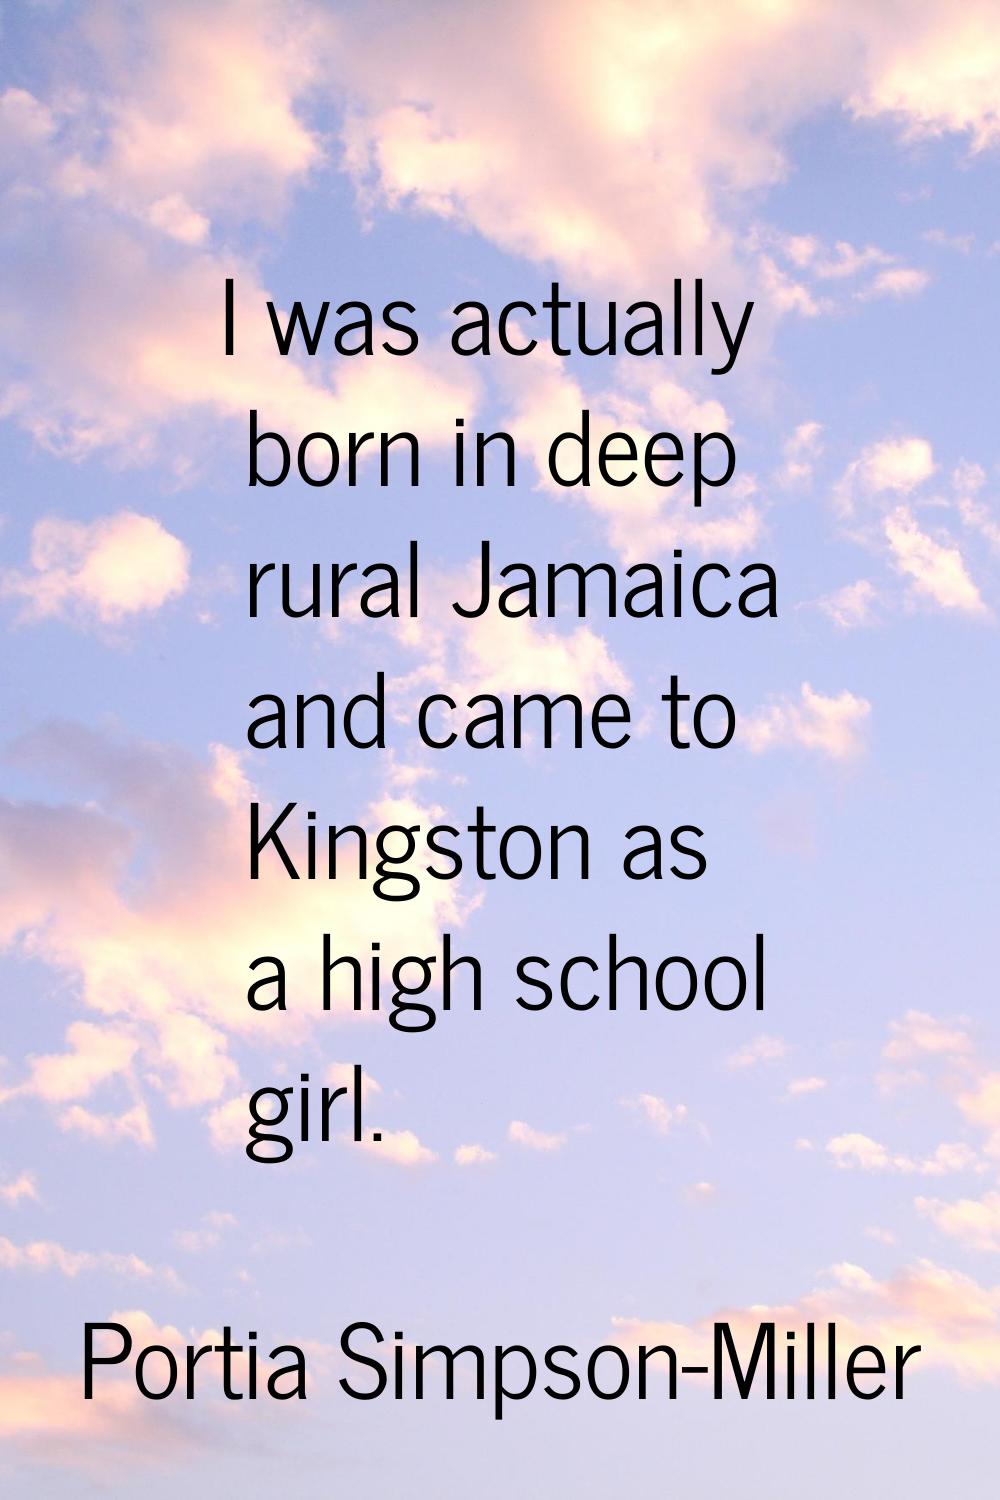 I was actually born in deep rural Jamaica and came to Kingston as a high school girl.